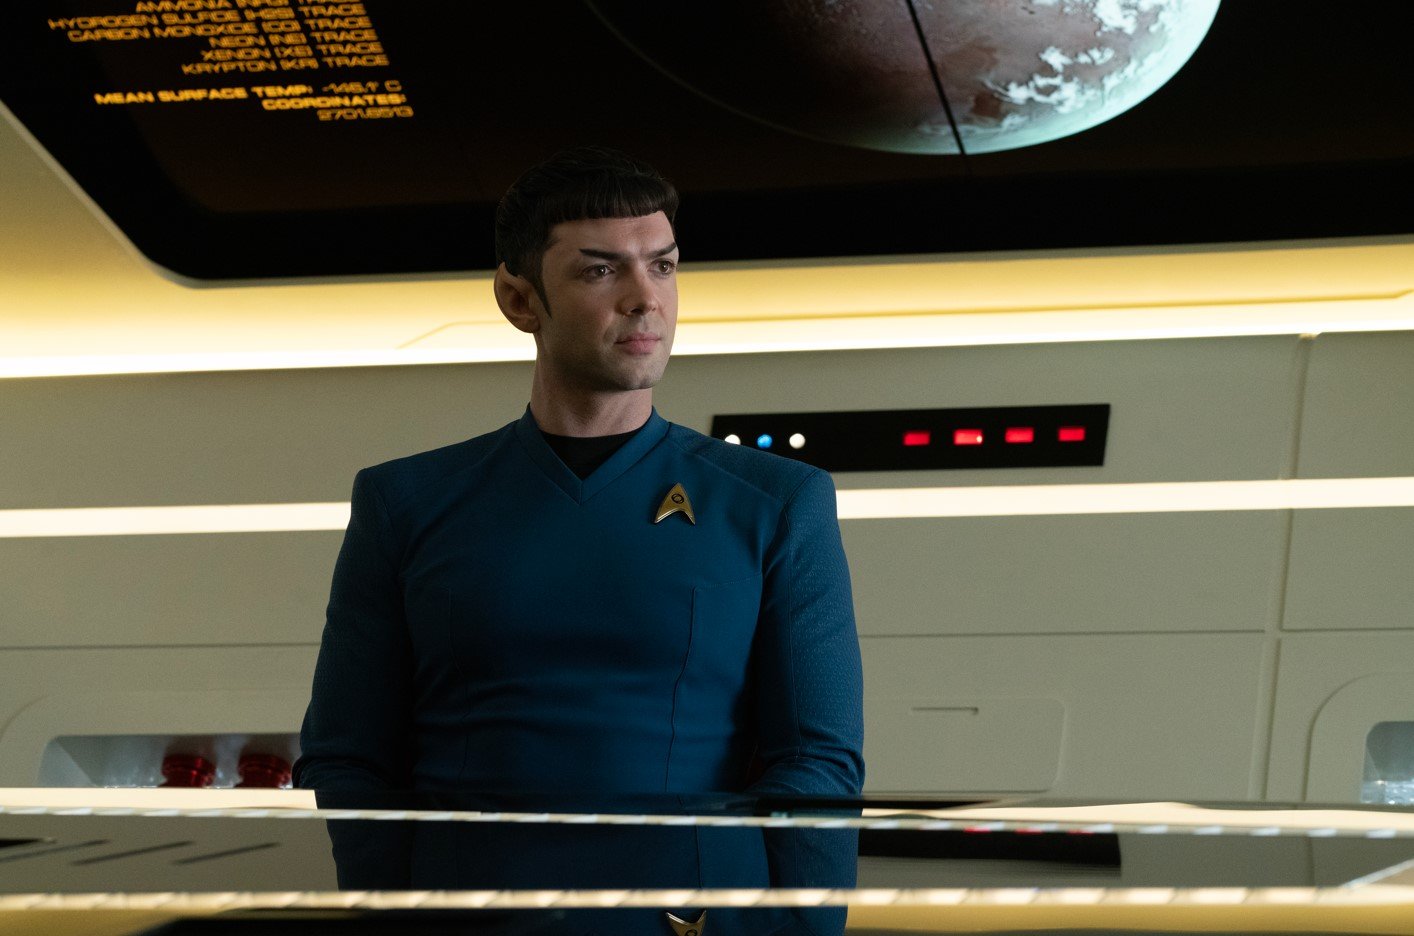   Ethan Peck  as Spock. Photo Credit: Michael Gibson/Paramount+ 